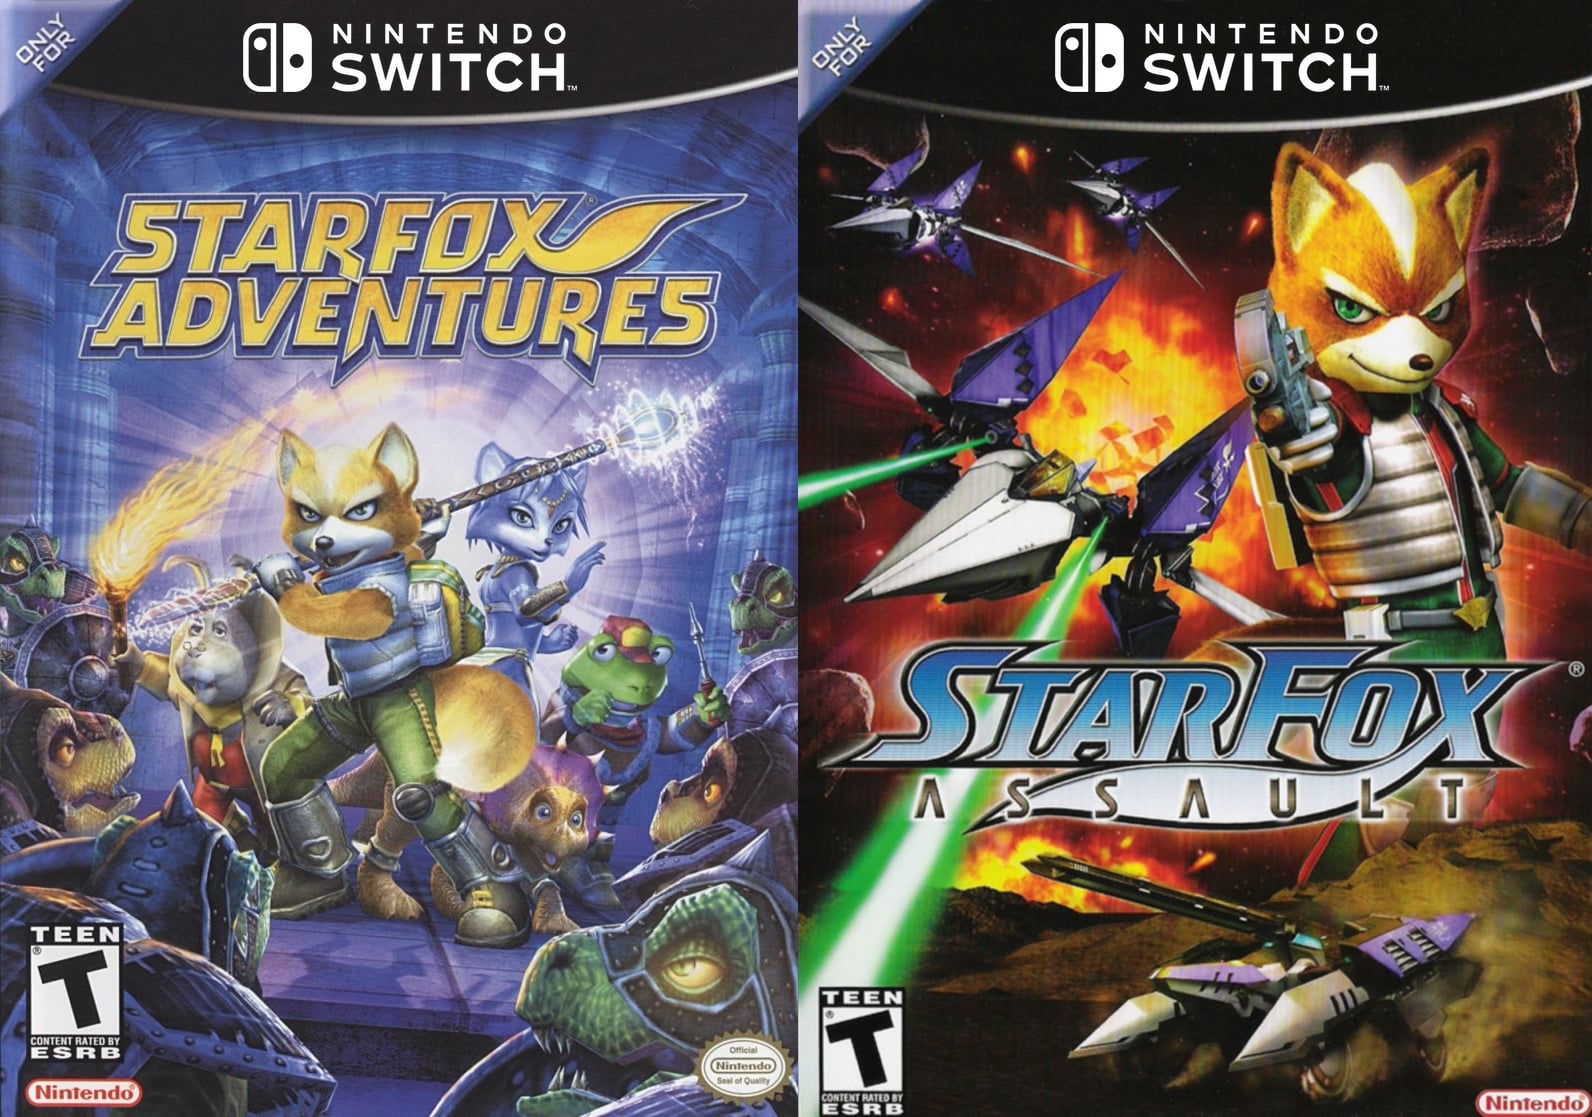 gamecube games coming to switch